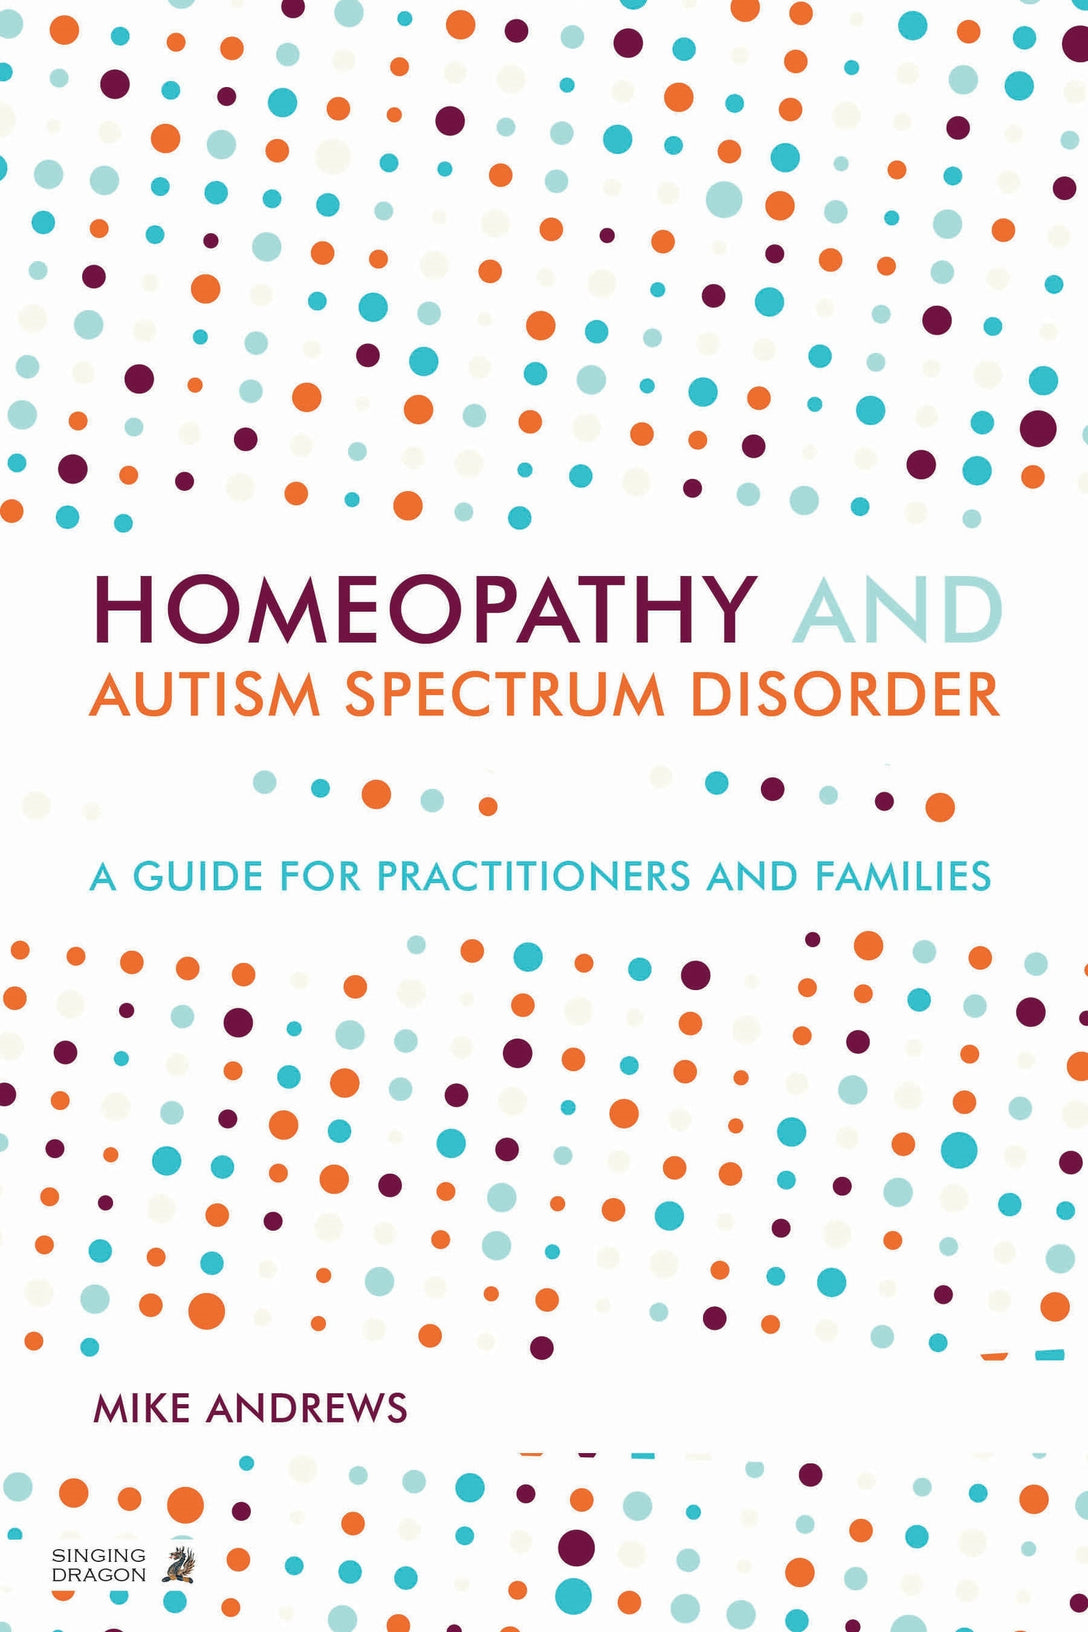 Homeopathy and Autism Spectrum Disorder by Mike Andrews